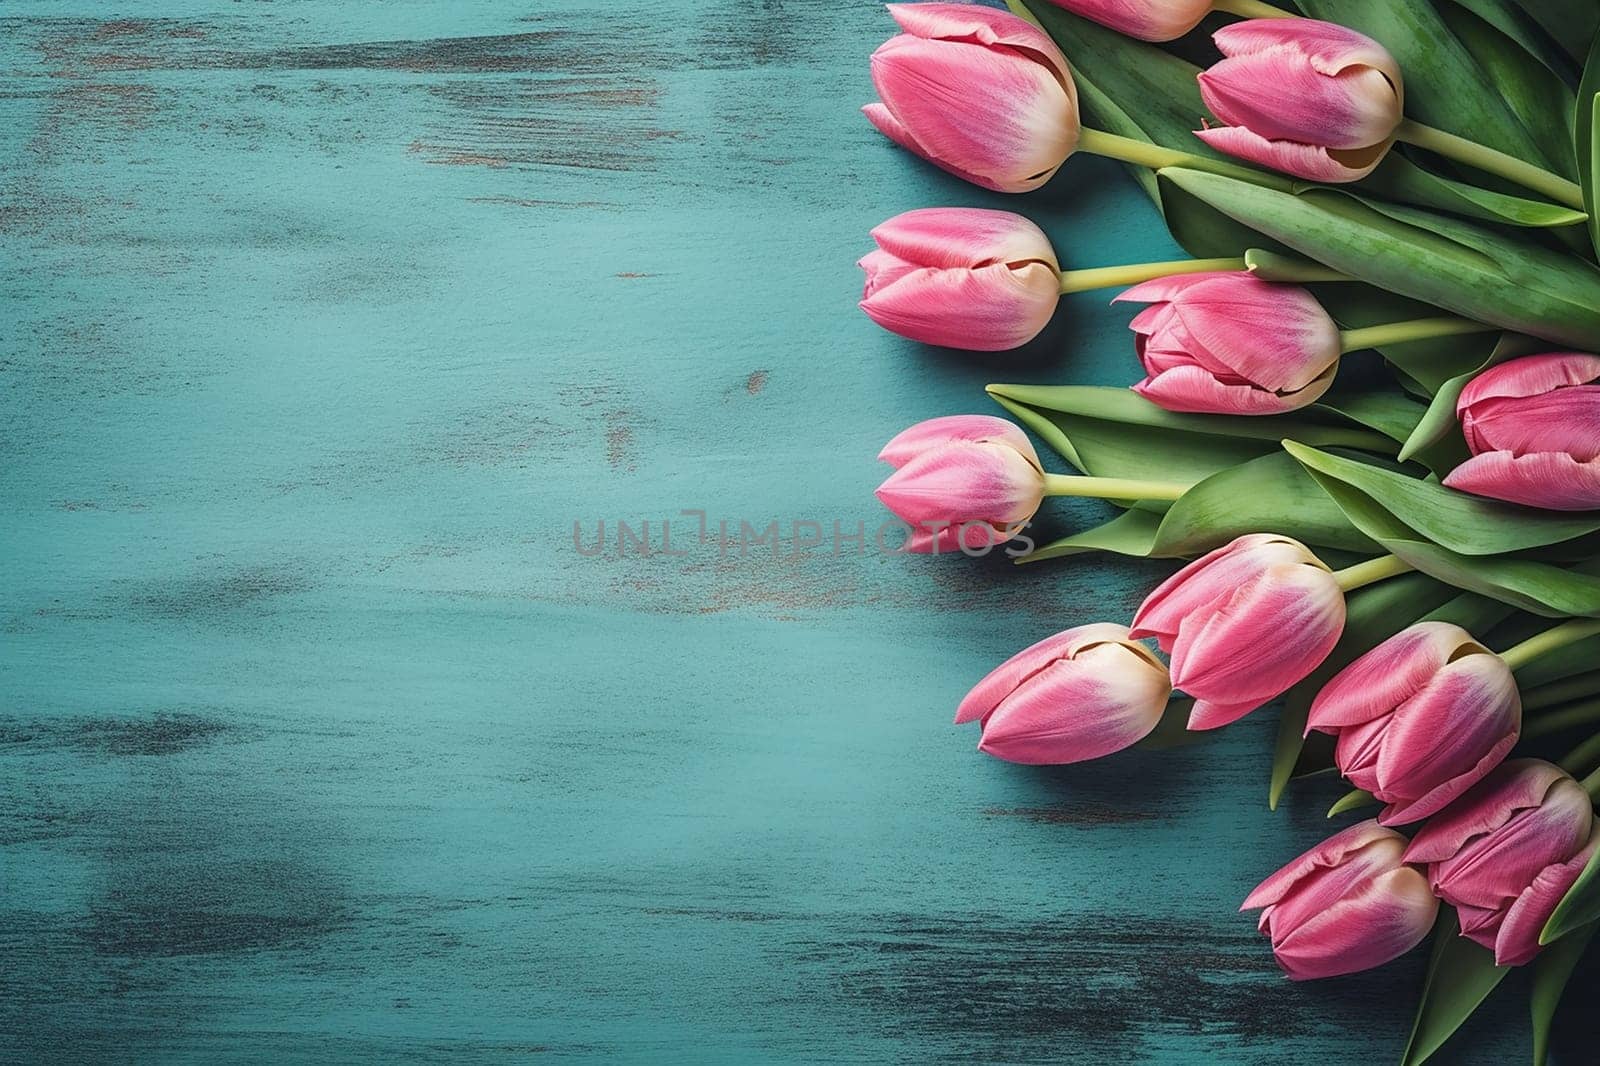 A bunch of pink tulips resting on a turquoise wooden surface. by Hype2art